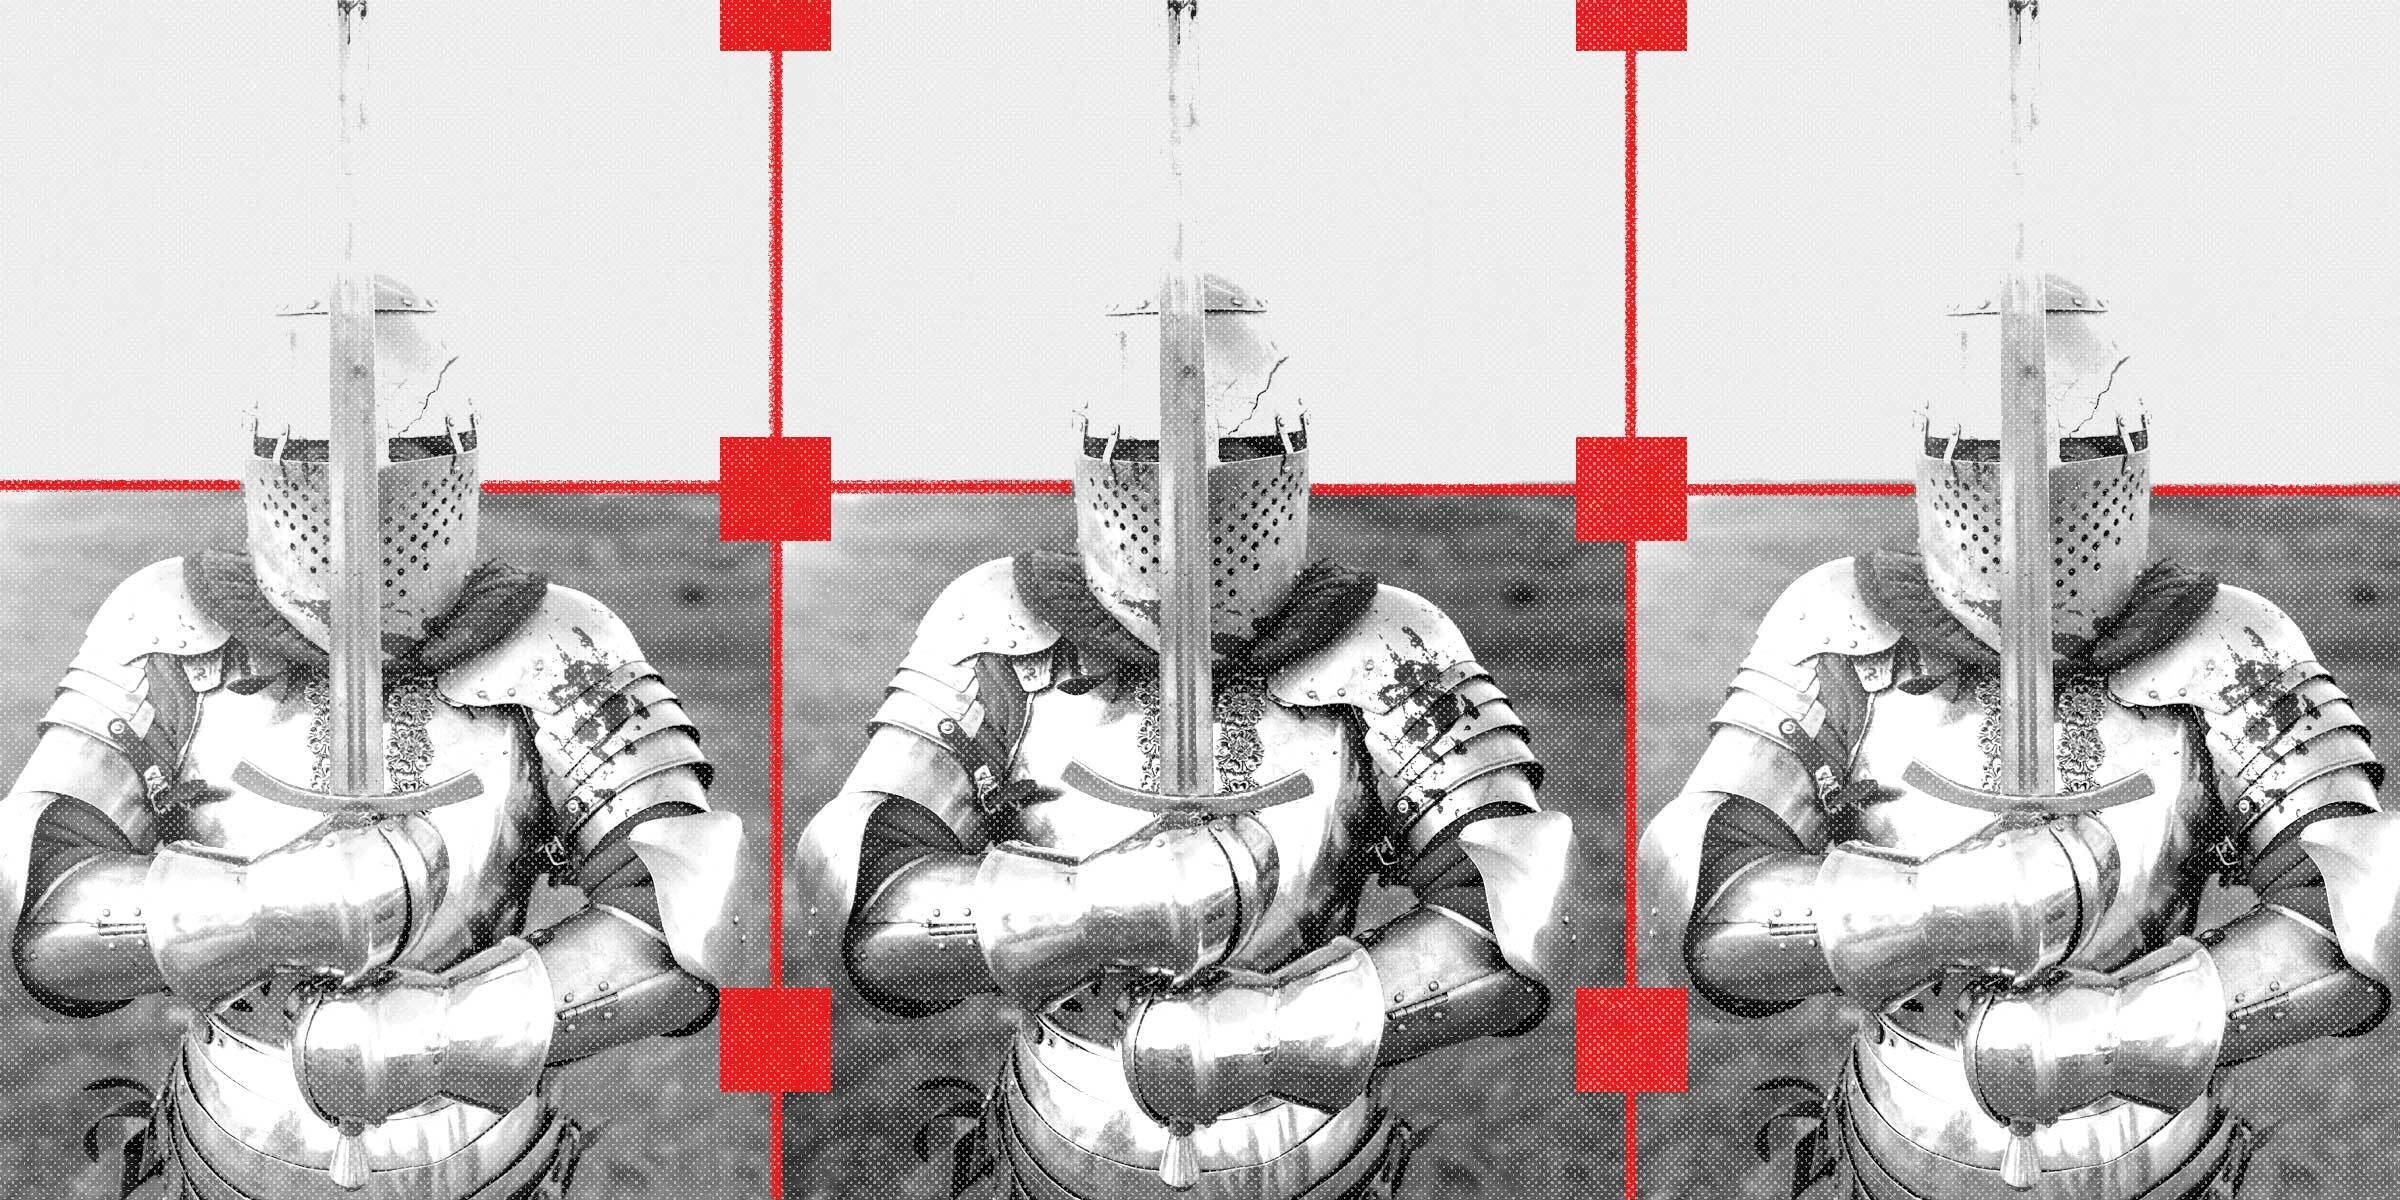 Artificial Intelligence is a Suit of Armor, Not an Enemy